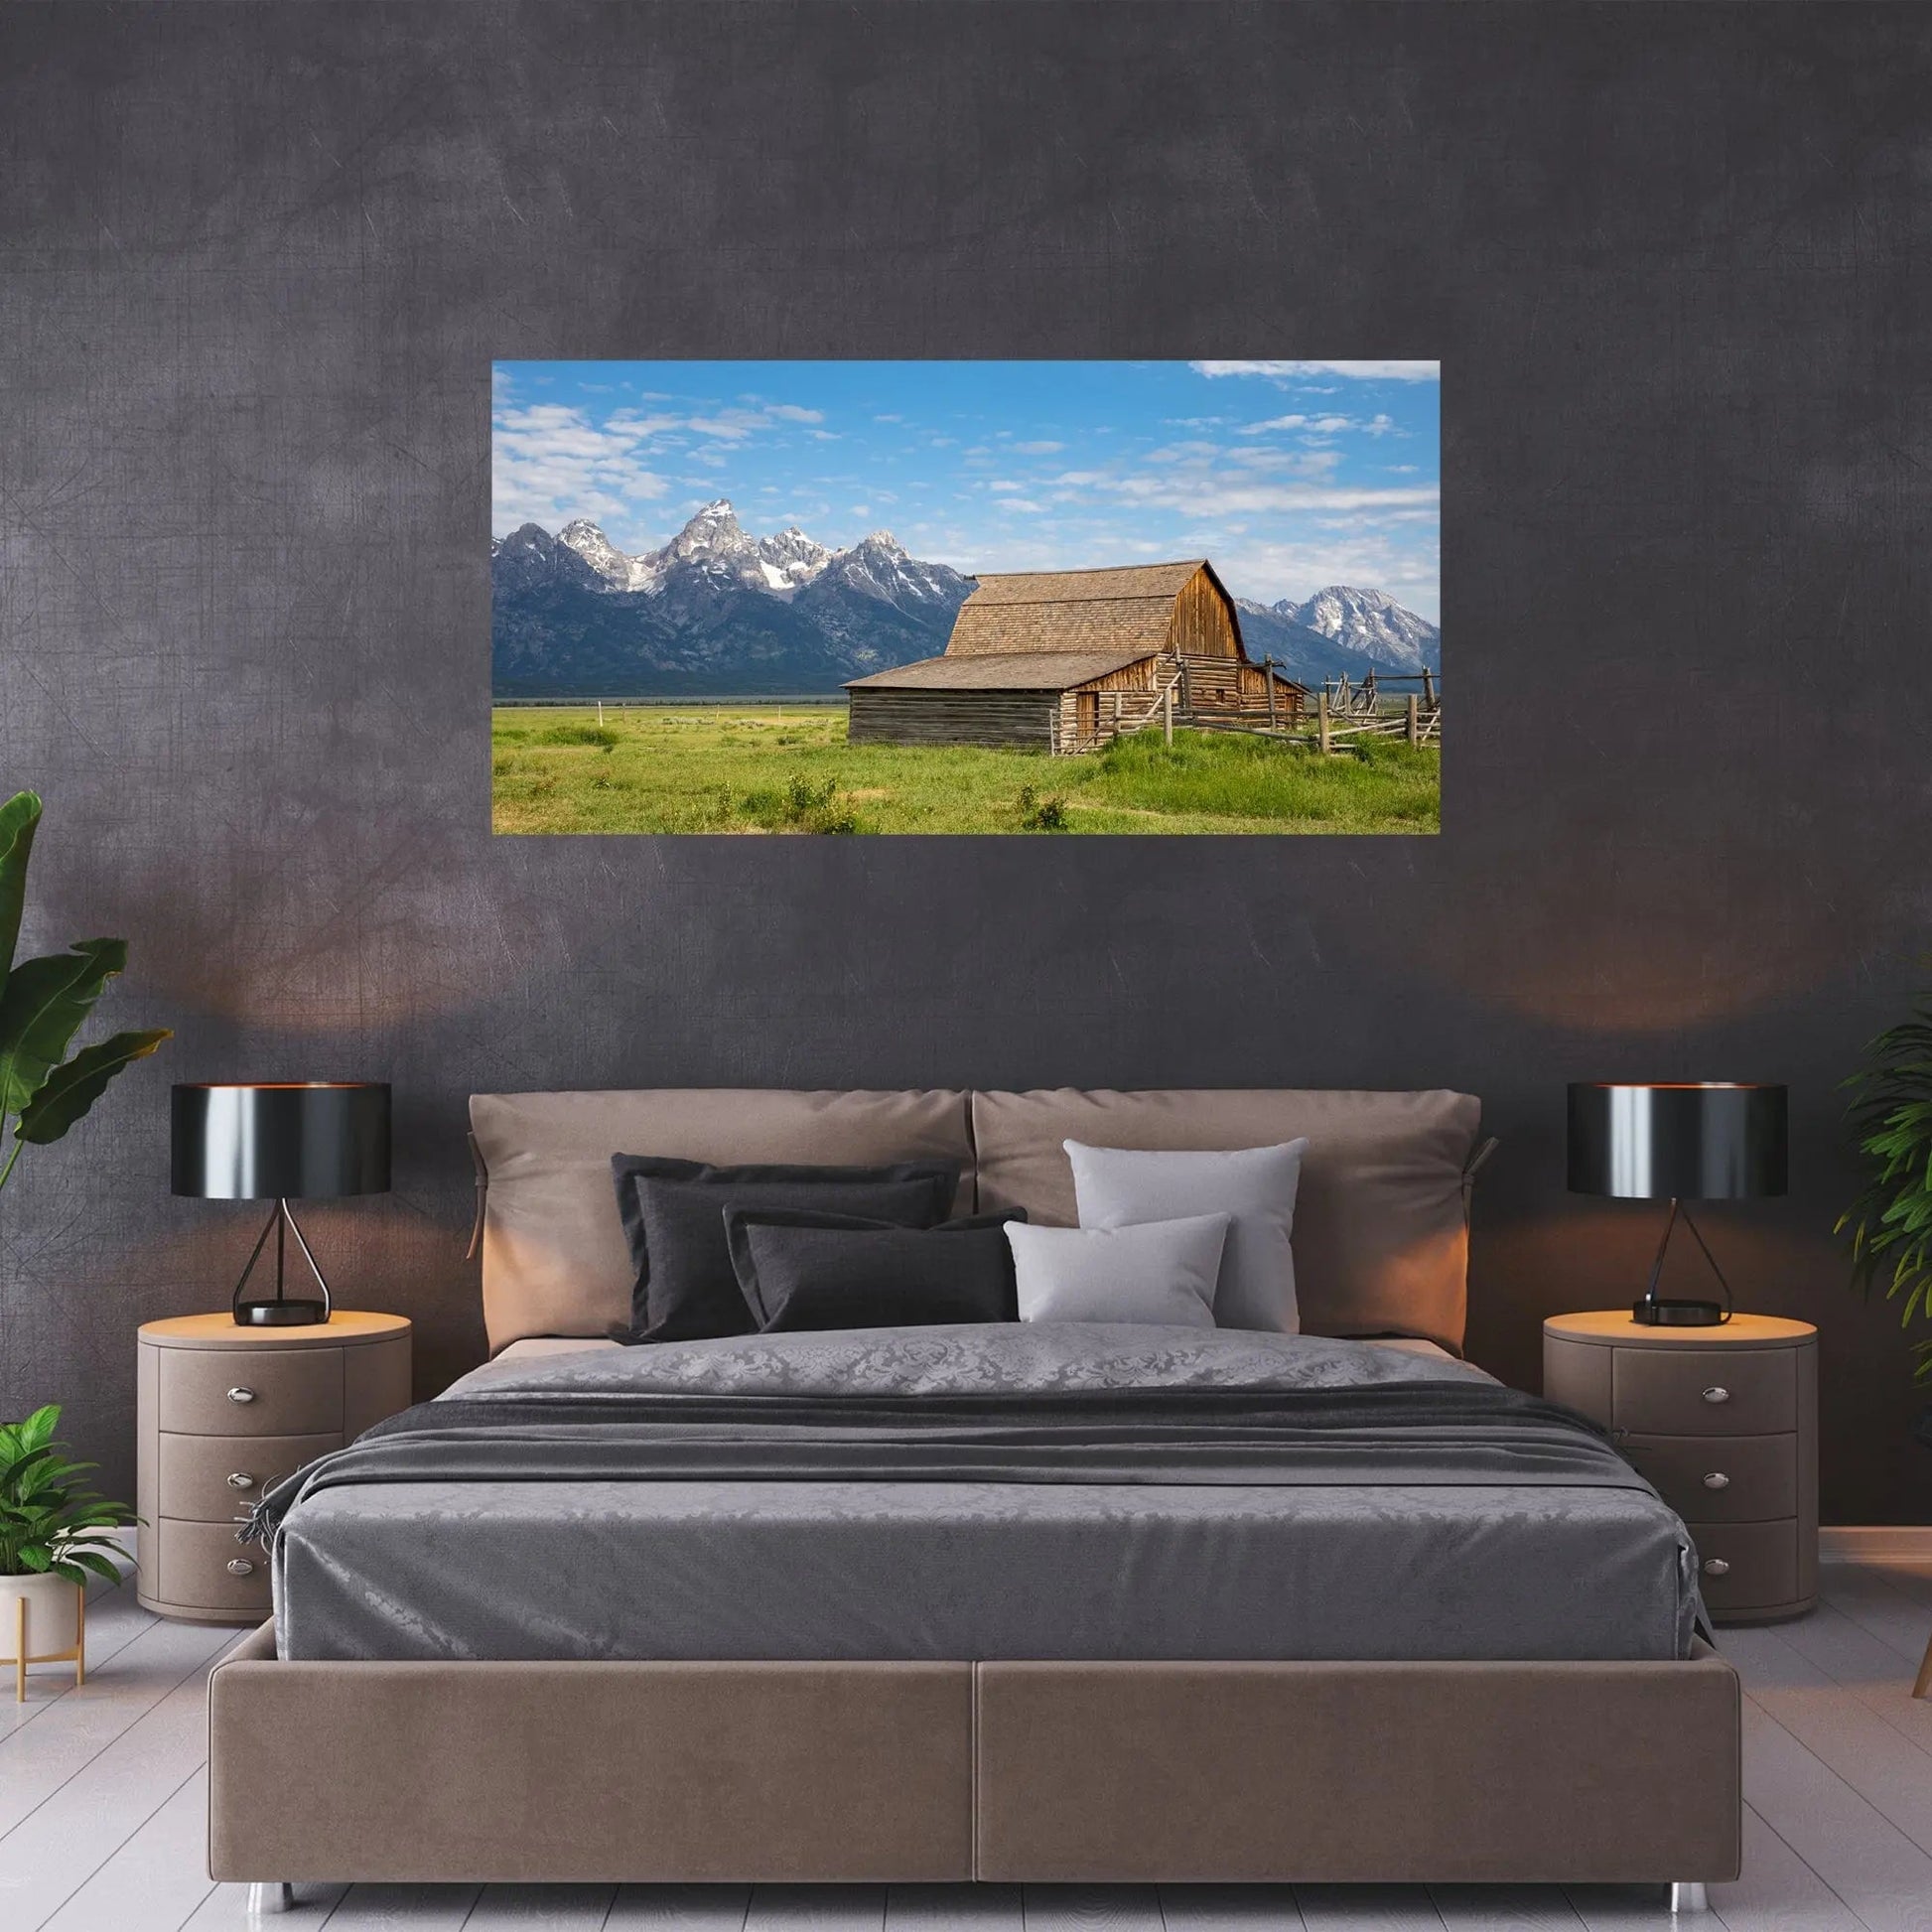 Large art of Moulton barn Mormon Row Wyoming hanging in brown and grey bedroom